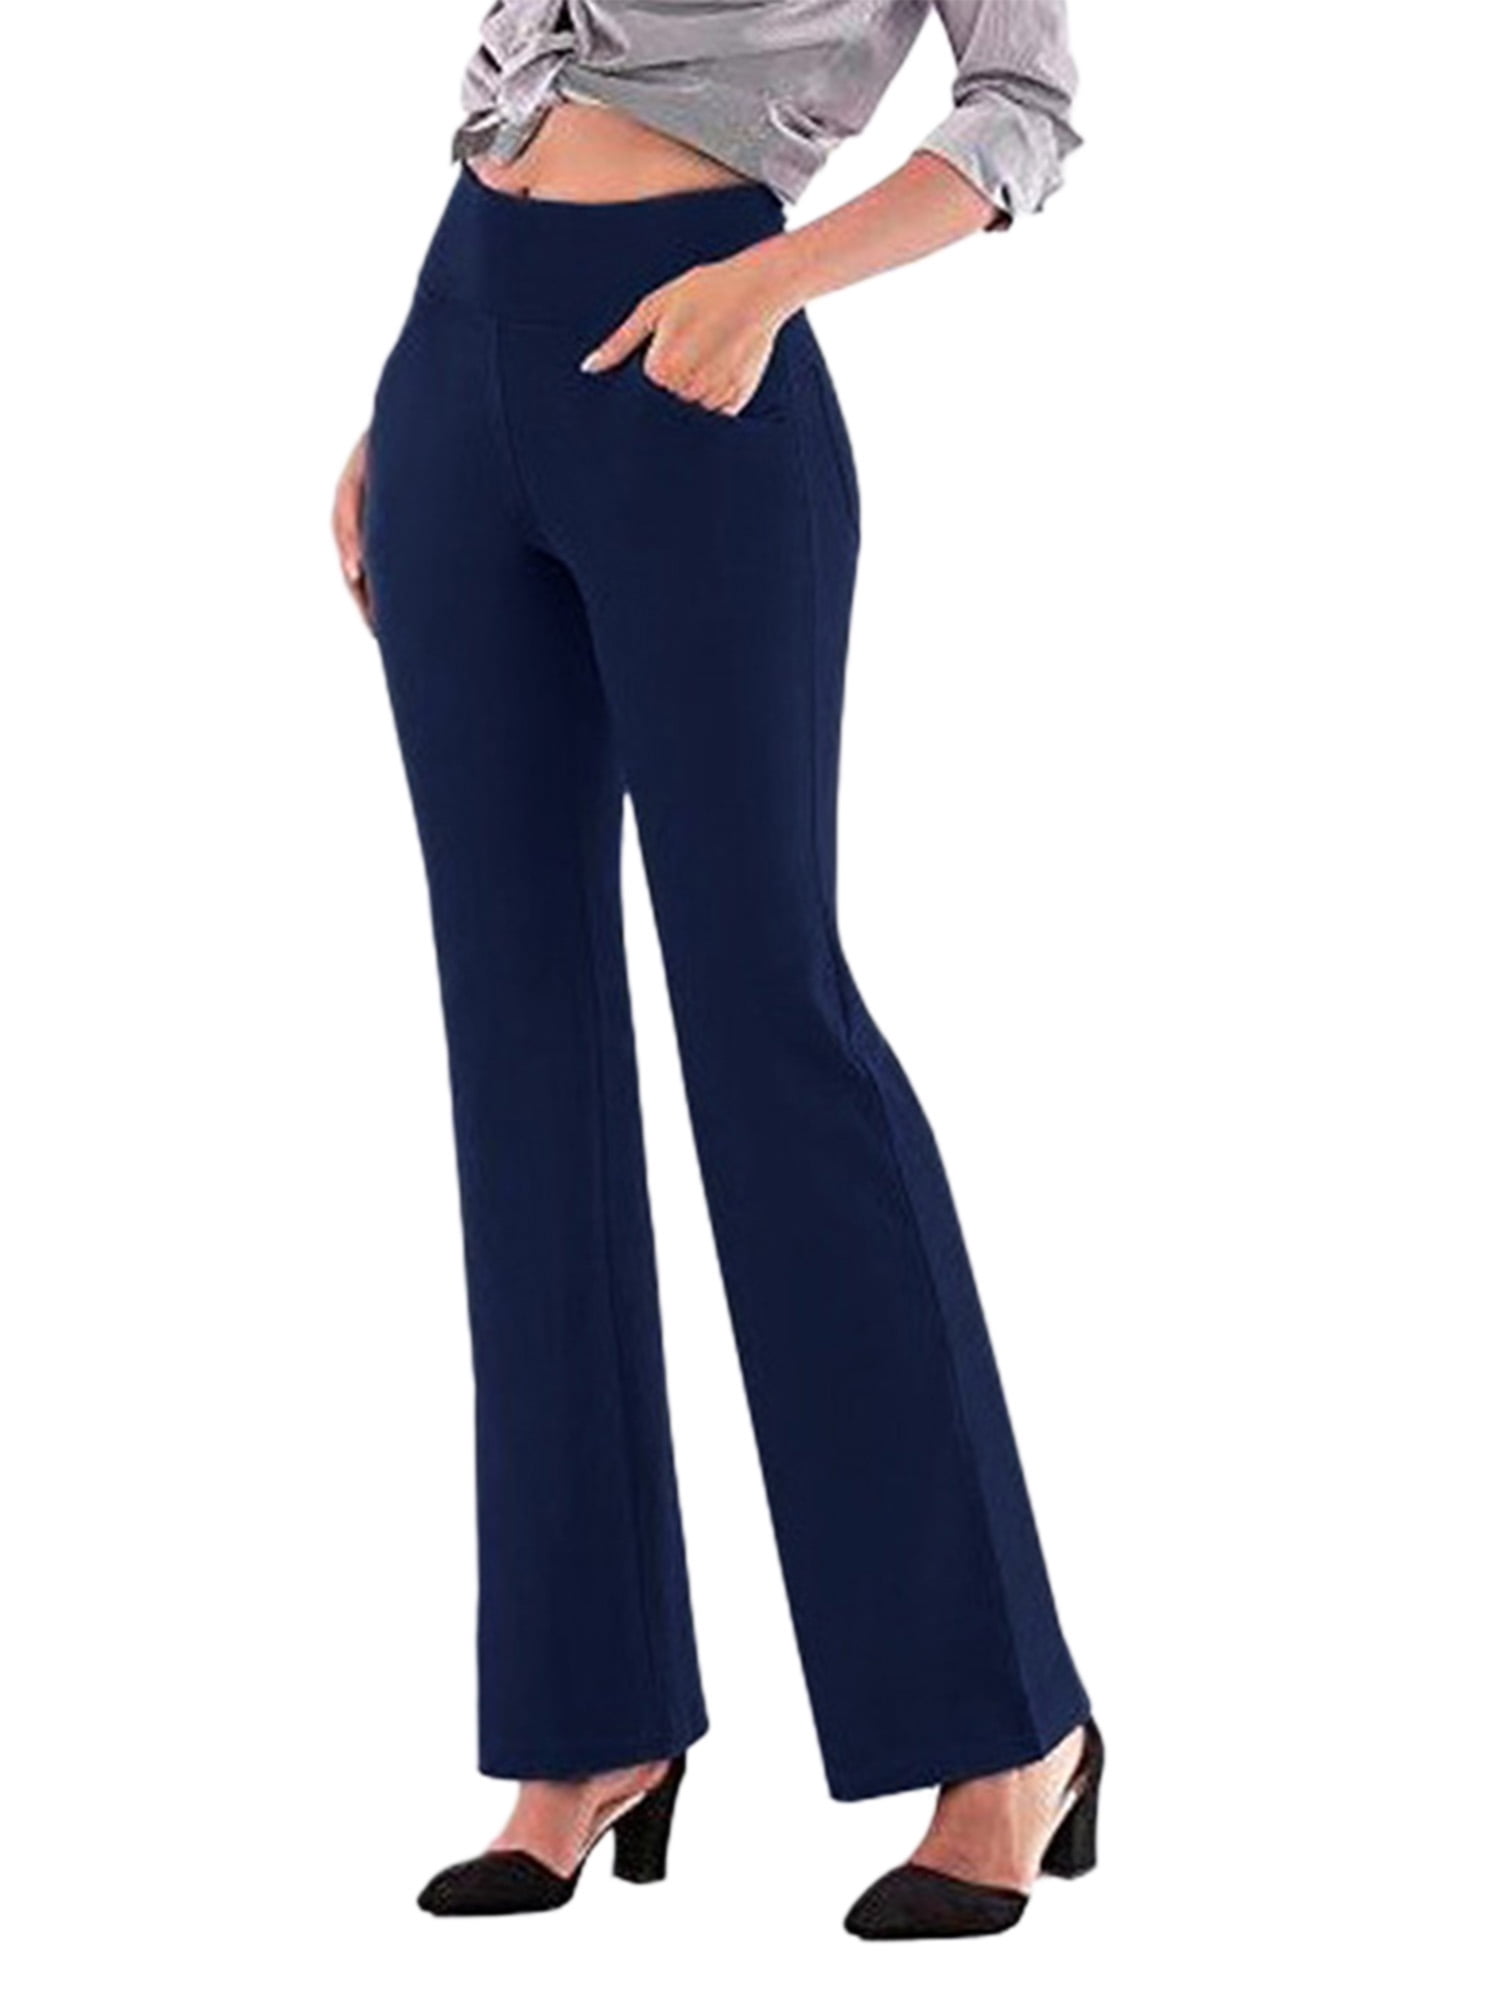 Ladies Navy Blue Work Trousers  Straight Leg Trousers Womens